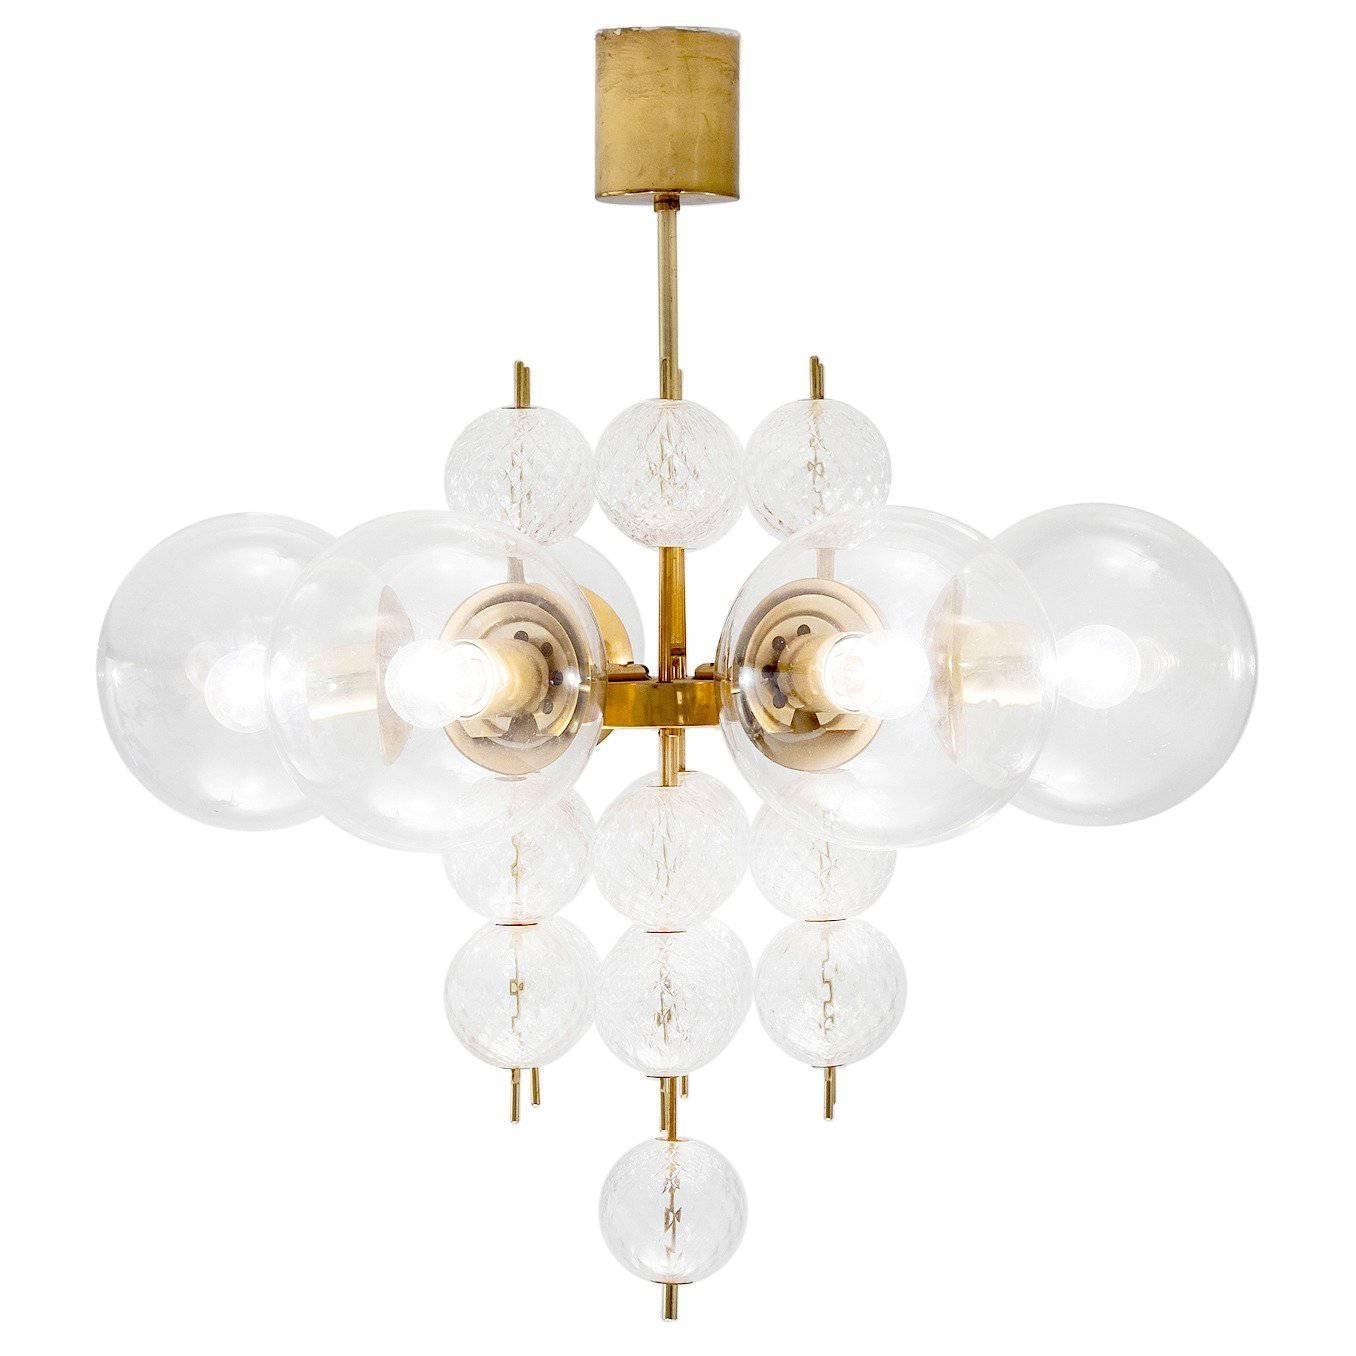 Large Chandelier with Brass and Structured Glass Bulbs